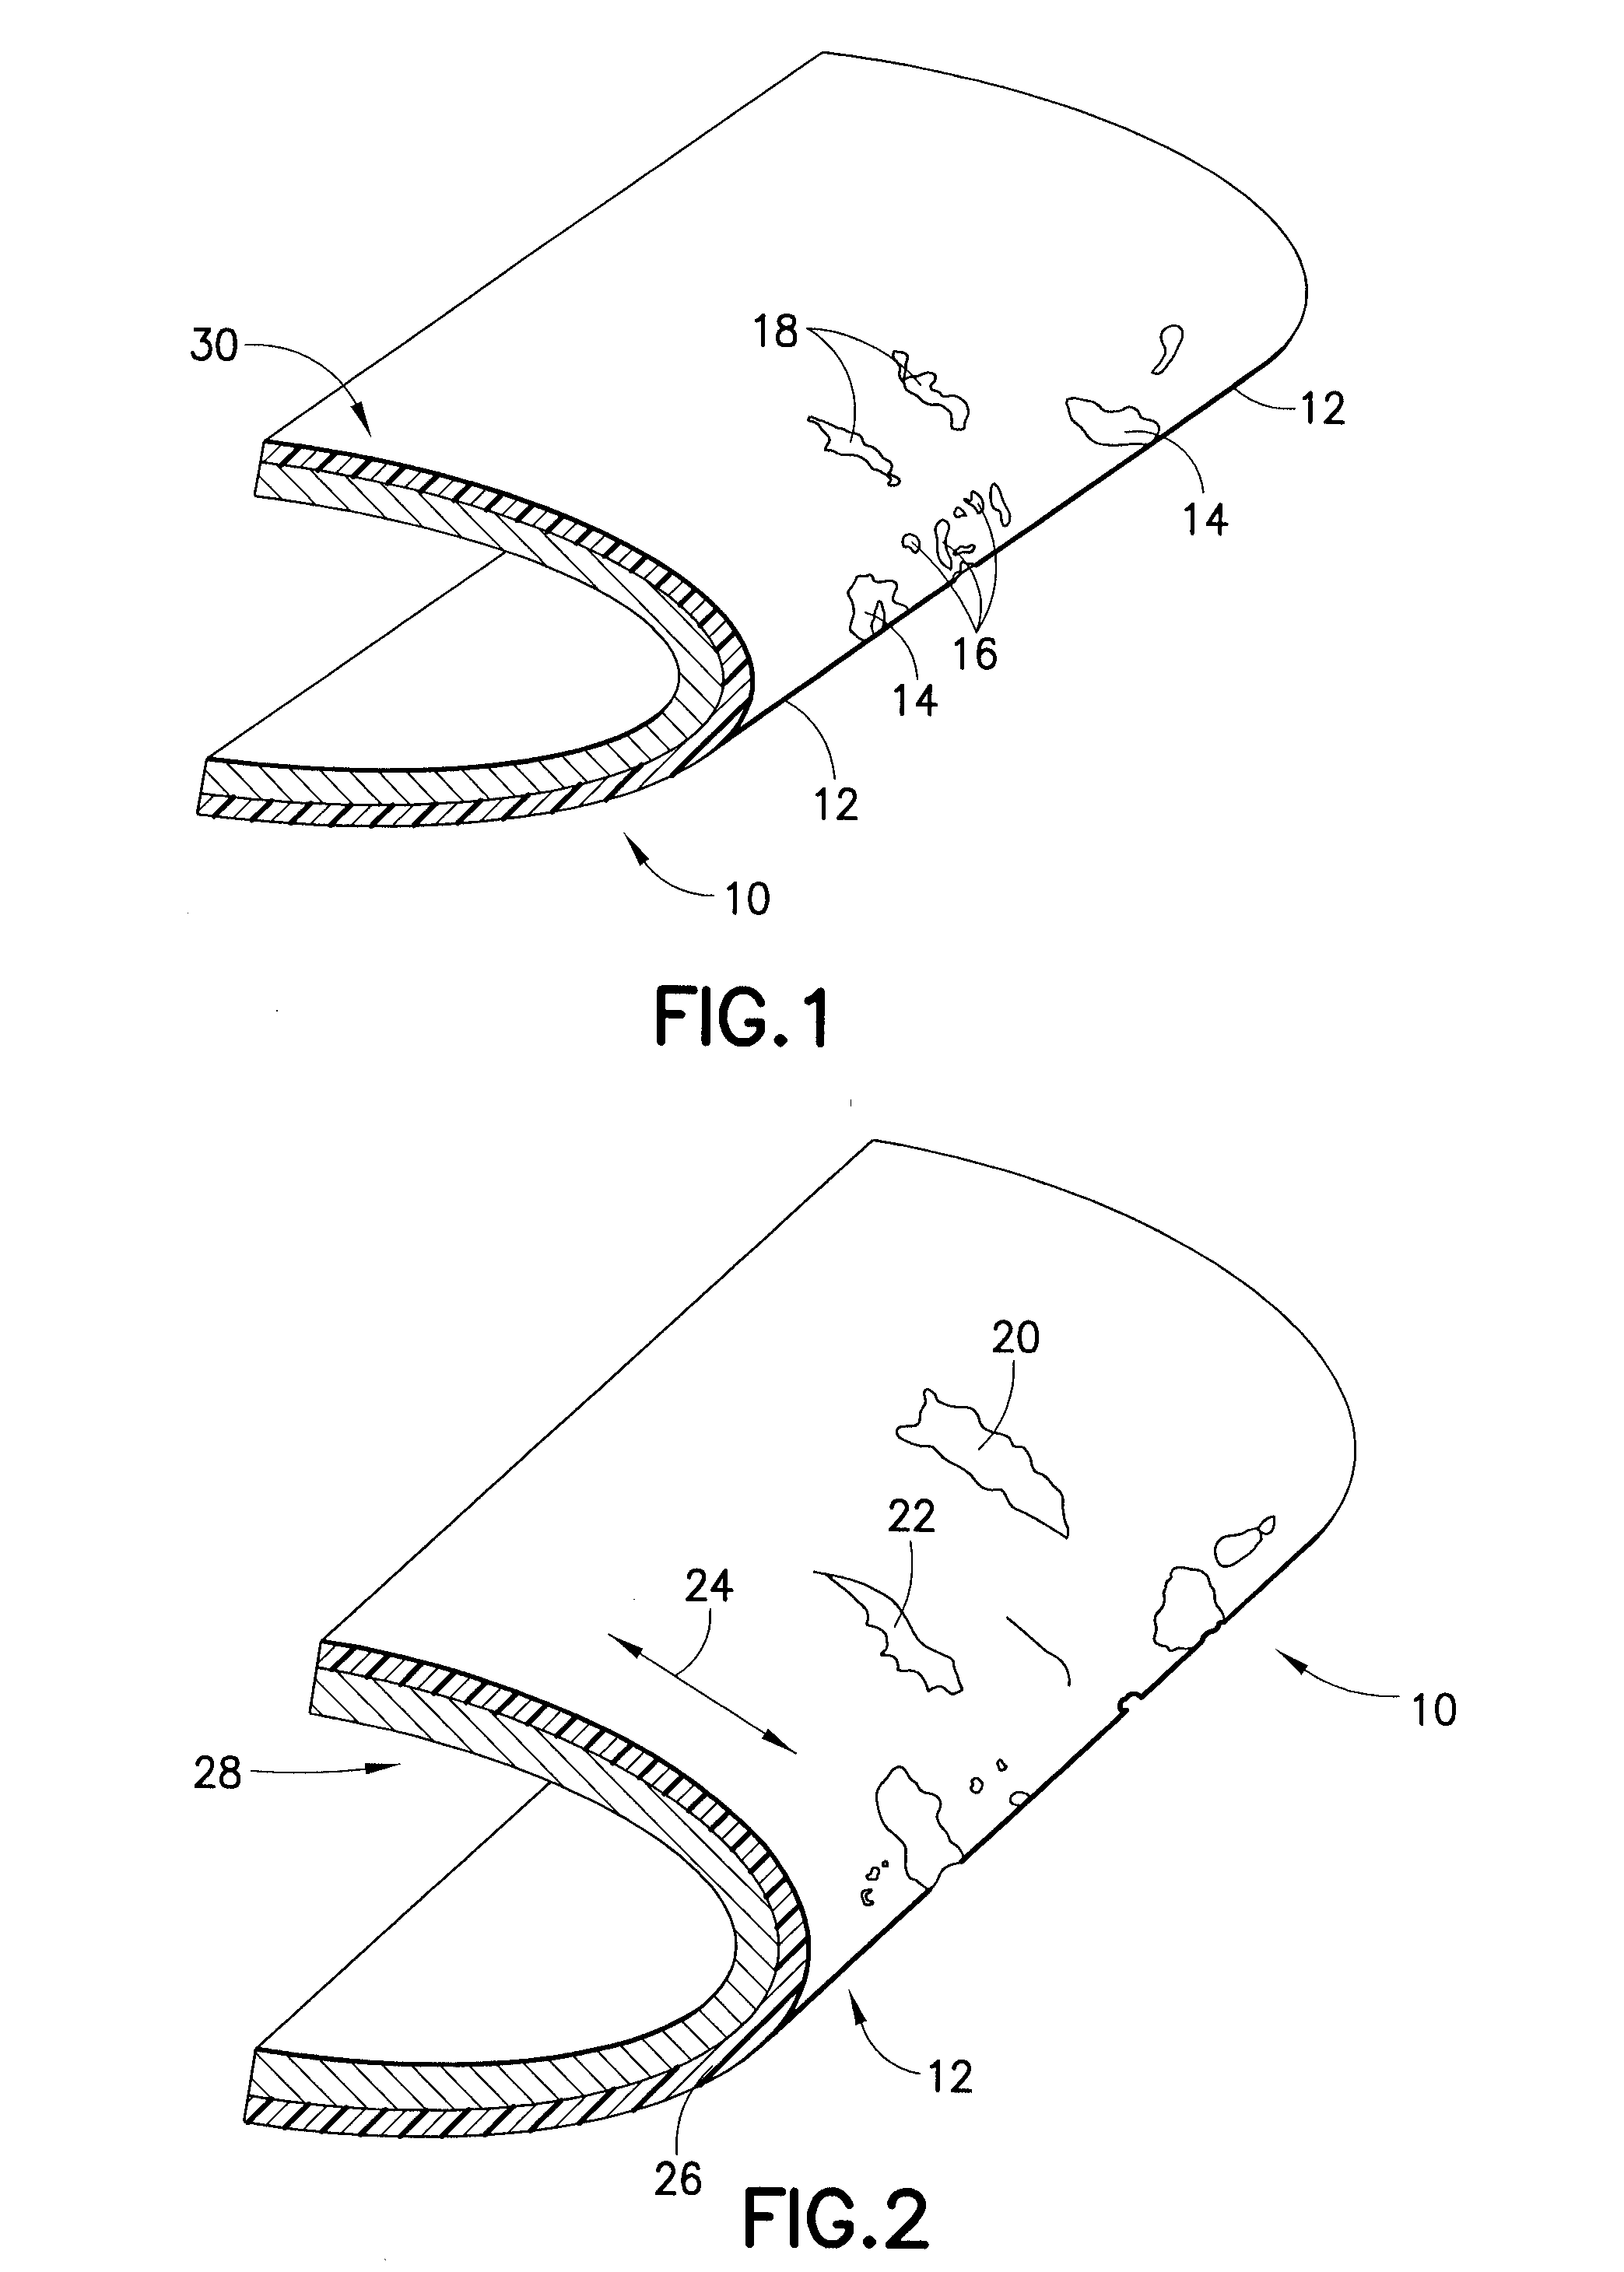 Method and coating for protecting and repairing an airfoil surface using molded boots, sheet or tape